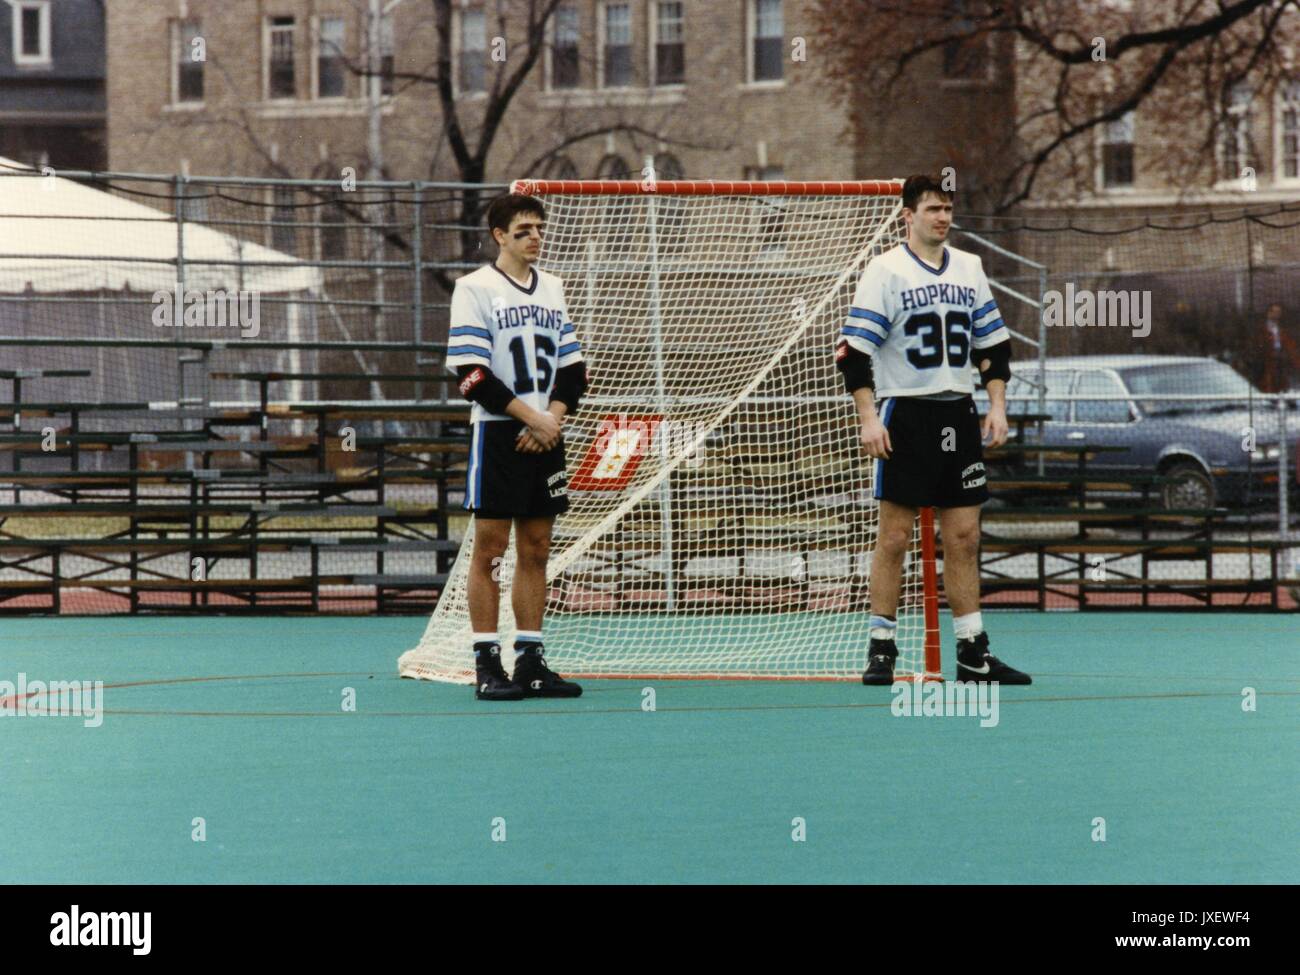 Lacrosse, Wills, Jeff, Lukacz, Brian Jeff Wills (#16) and Brian Lukacz (#36), the 1992 captains of the lacrosse team are standing in front of the goal post where a small flag memorializing Hopkins war dead was placed, 1992. Stock Photo